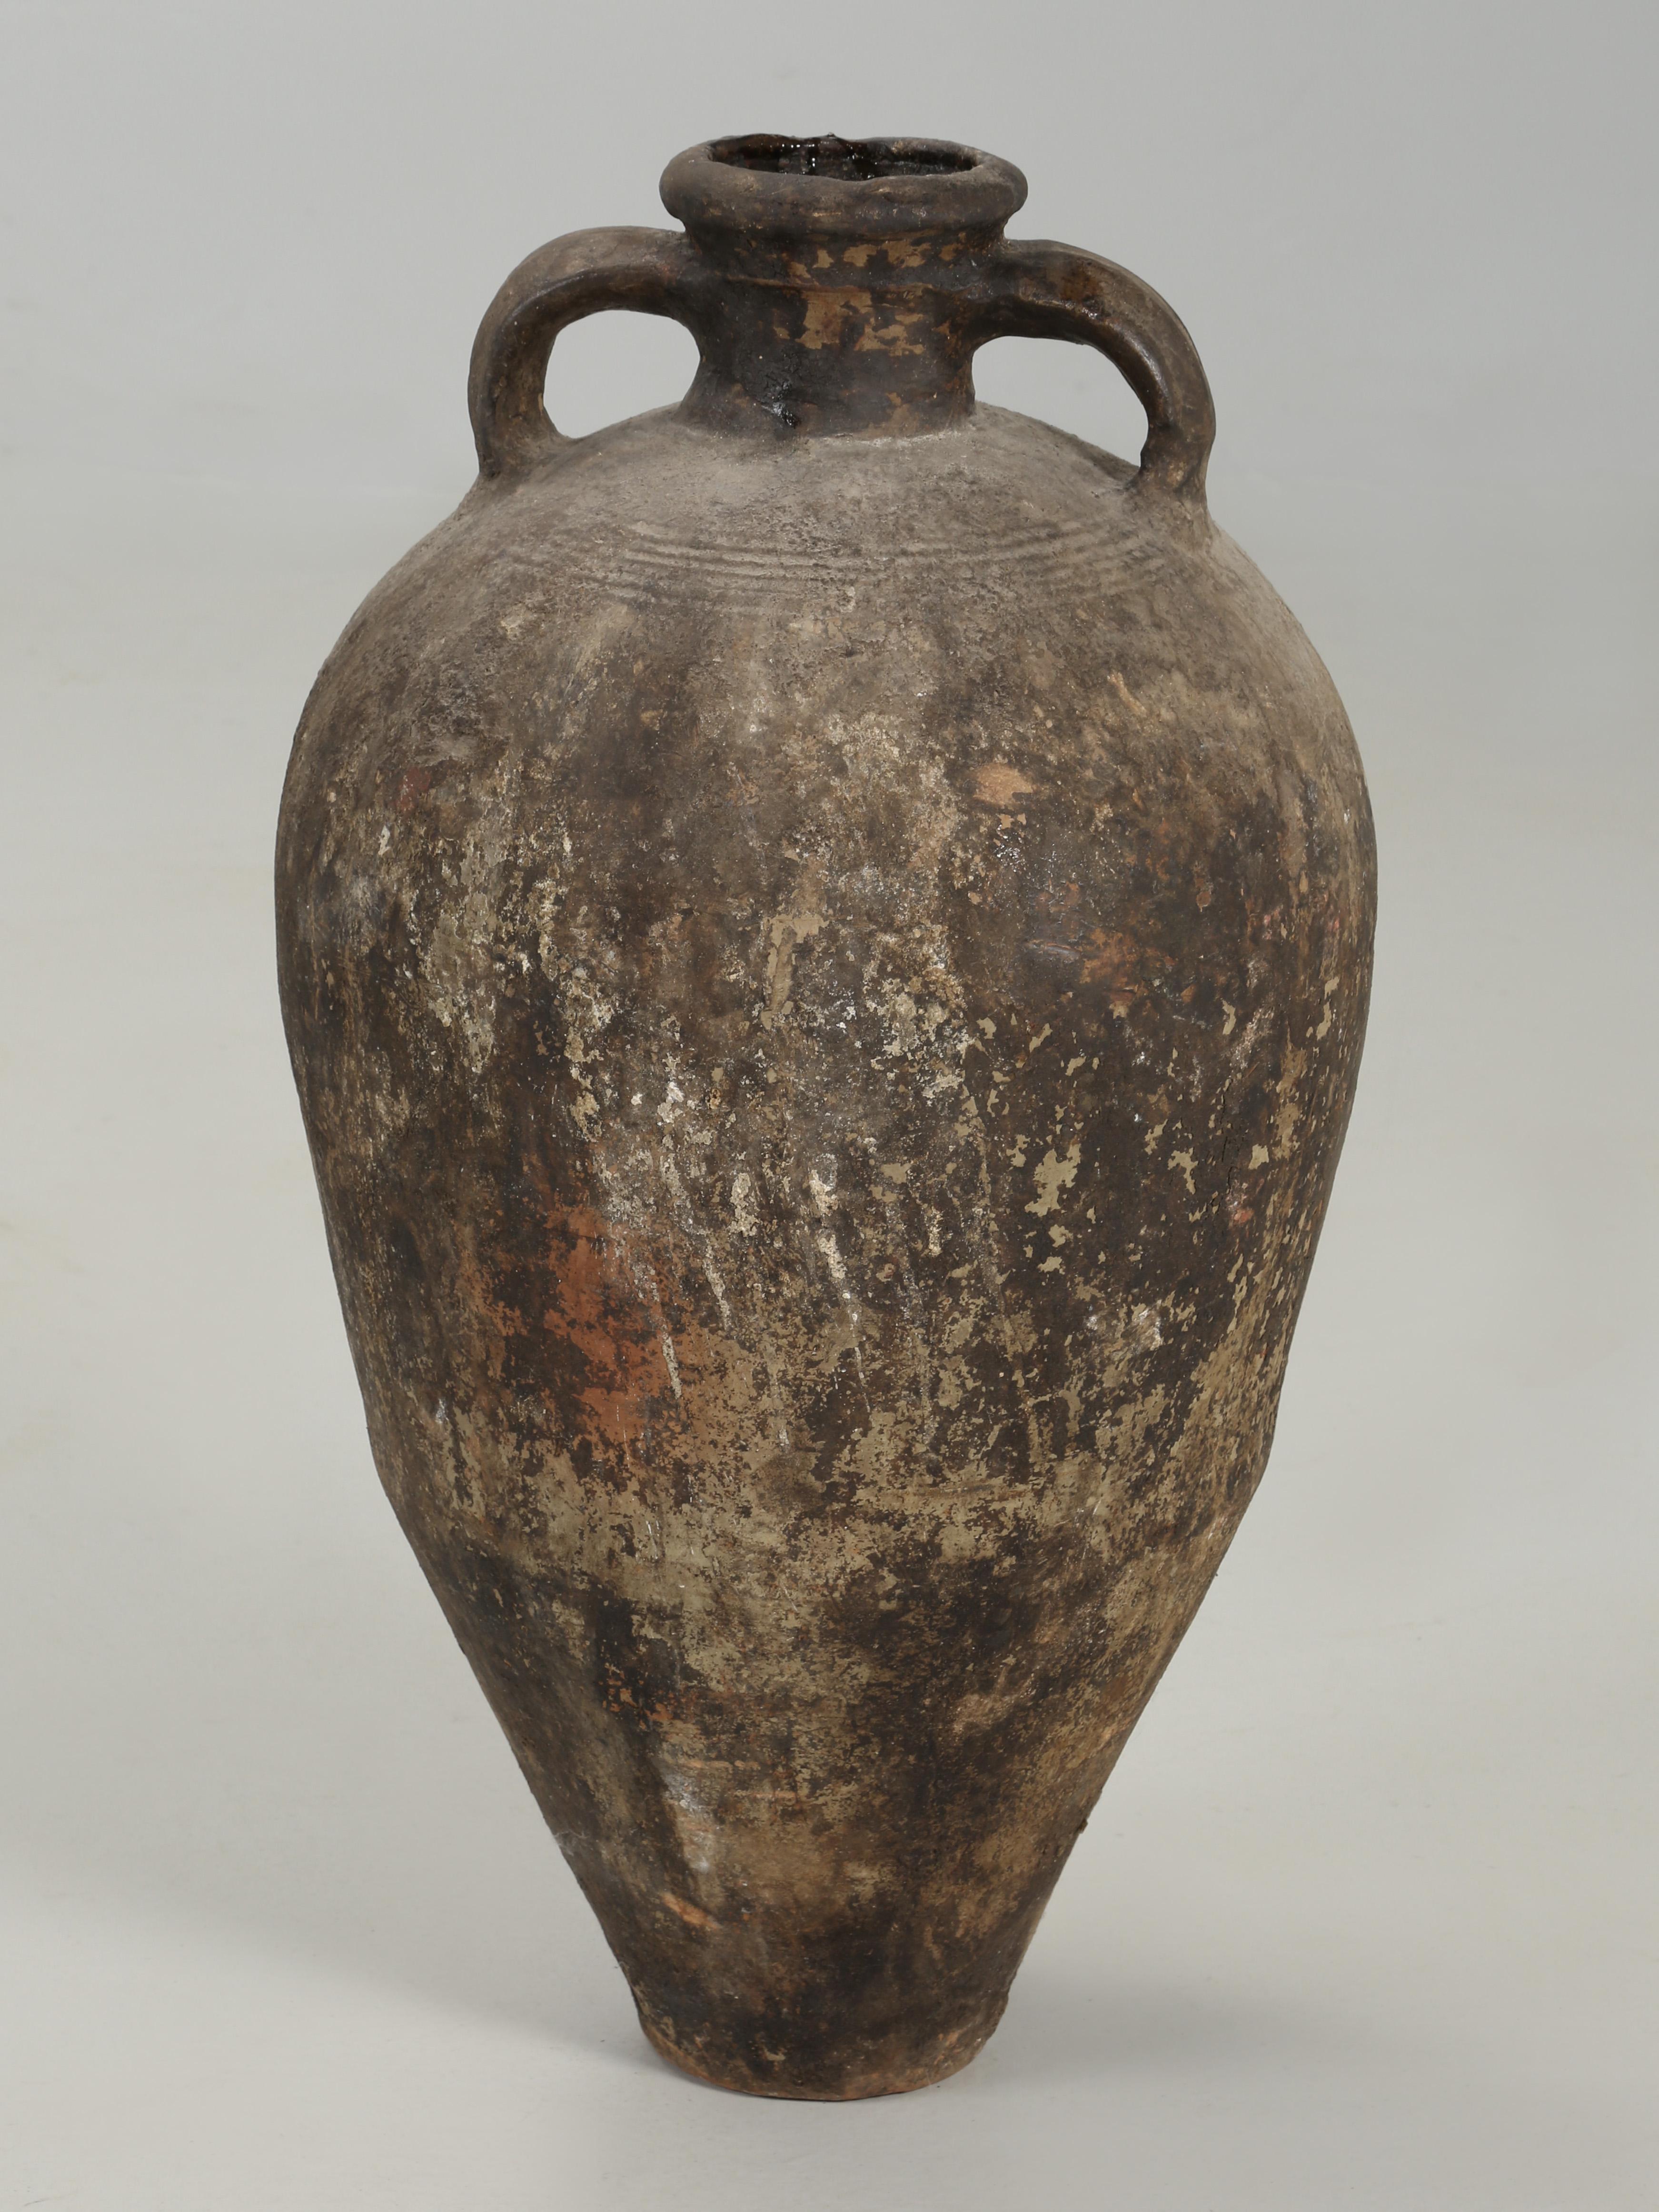 Antique French 19th century Provencal walnut oil jar or jug made of earthenware. We are quite confident that it was used for walnut oil, because there is still some in the jar. The French walnut oil jars were typically used to transport the locally